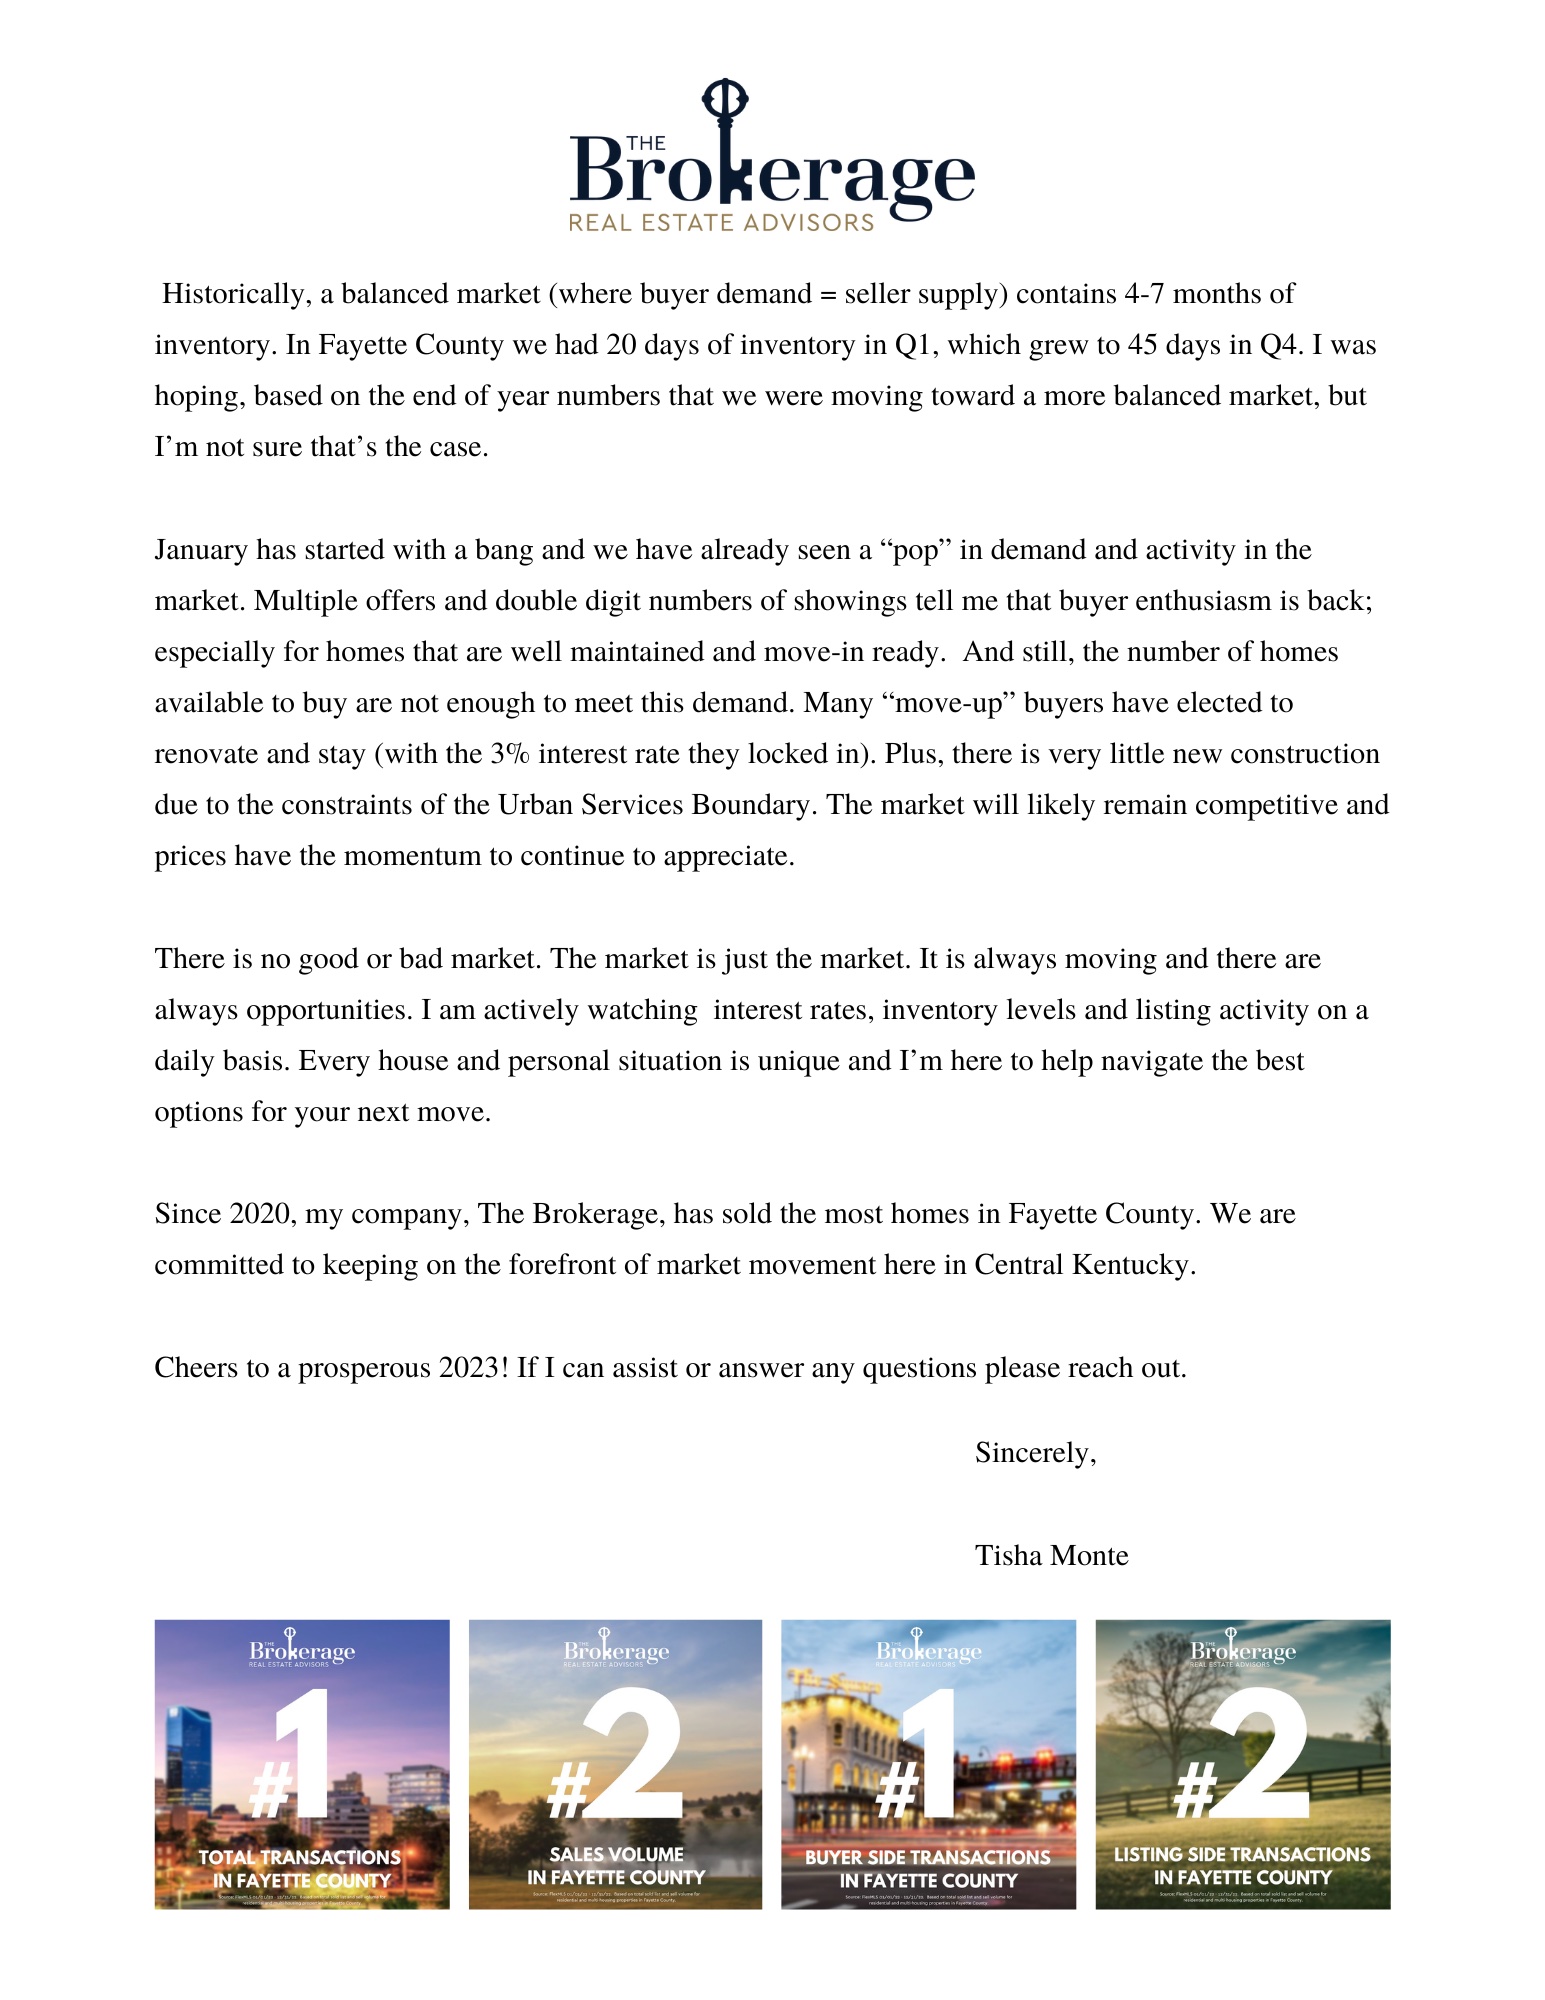 2nd page of newsletter